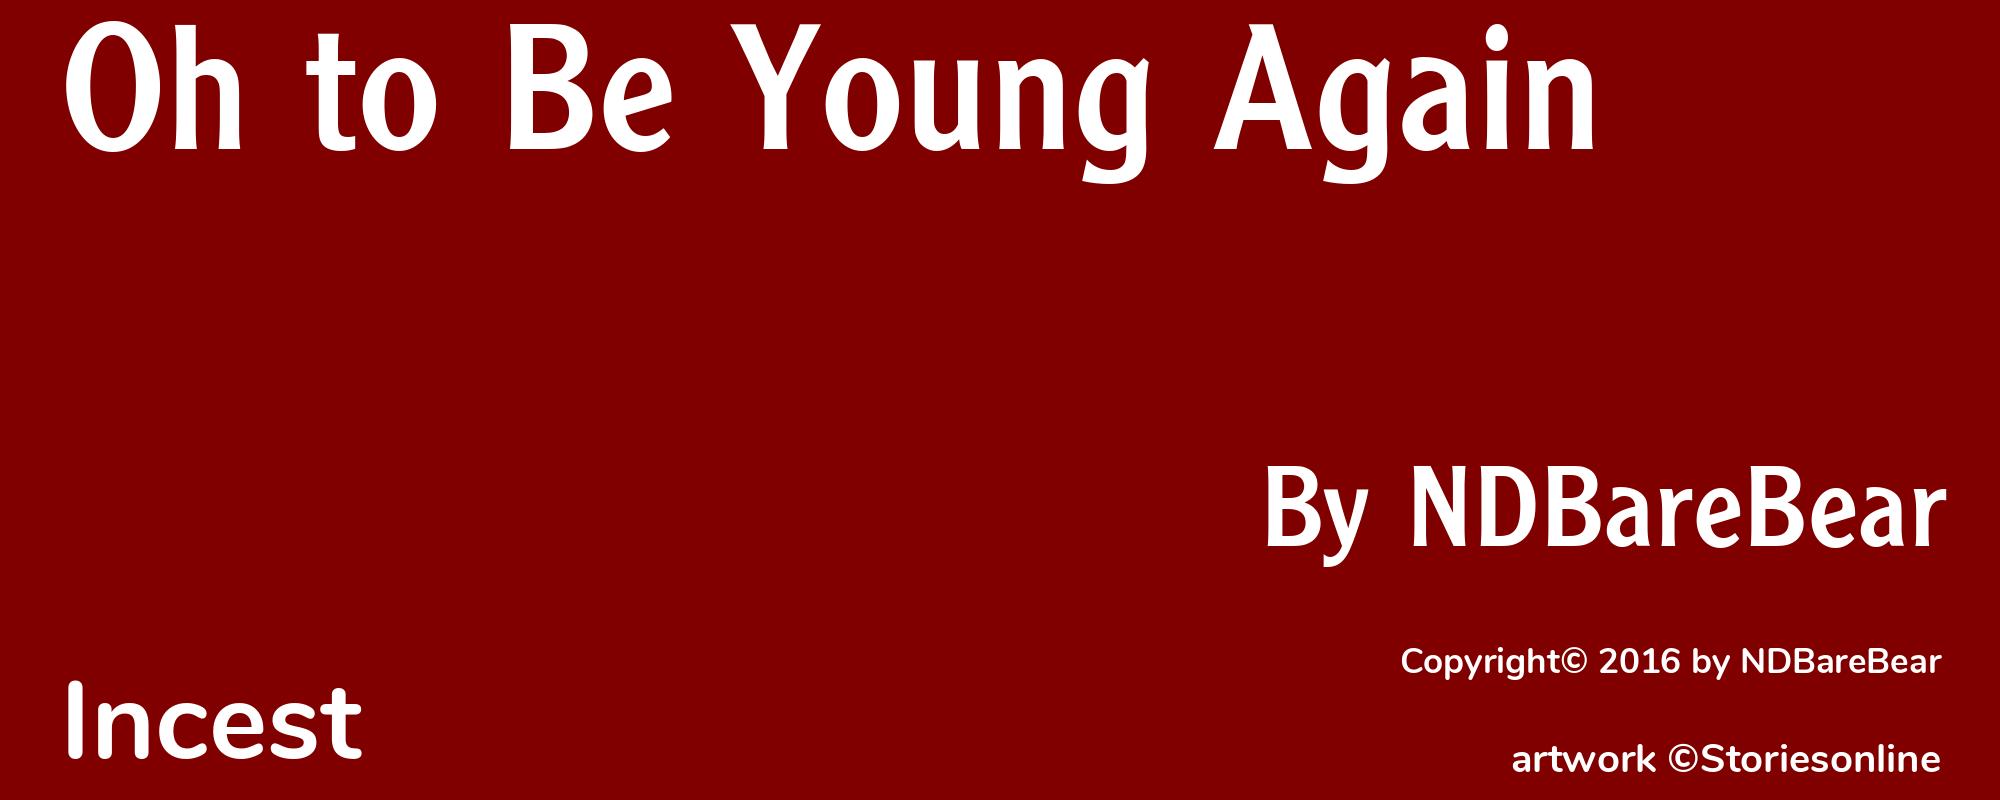 Oh to Be Young Again - Cover